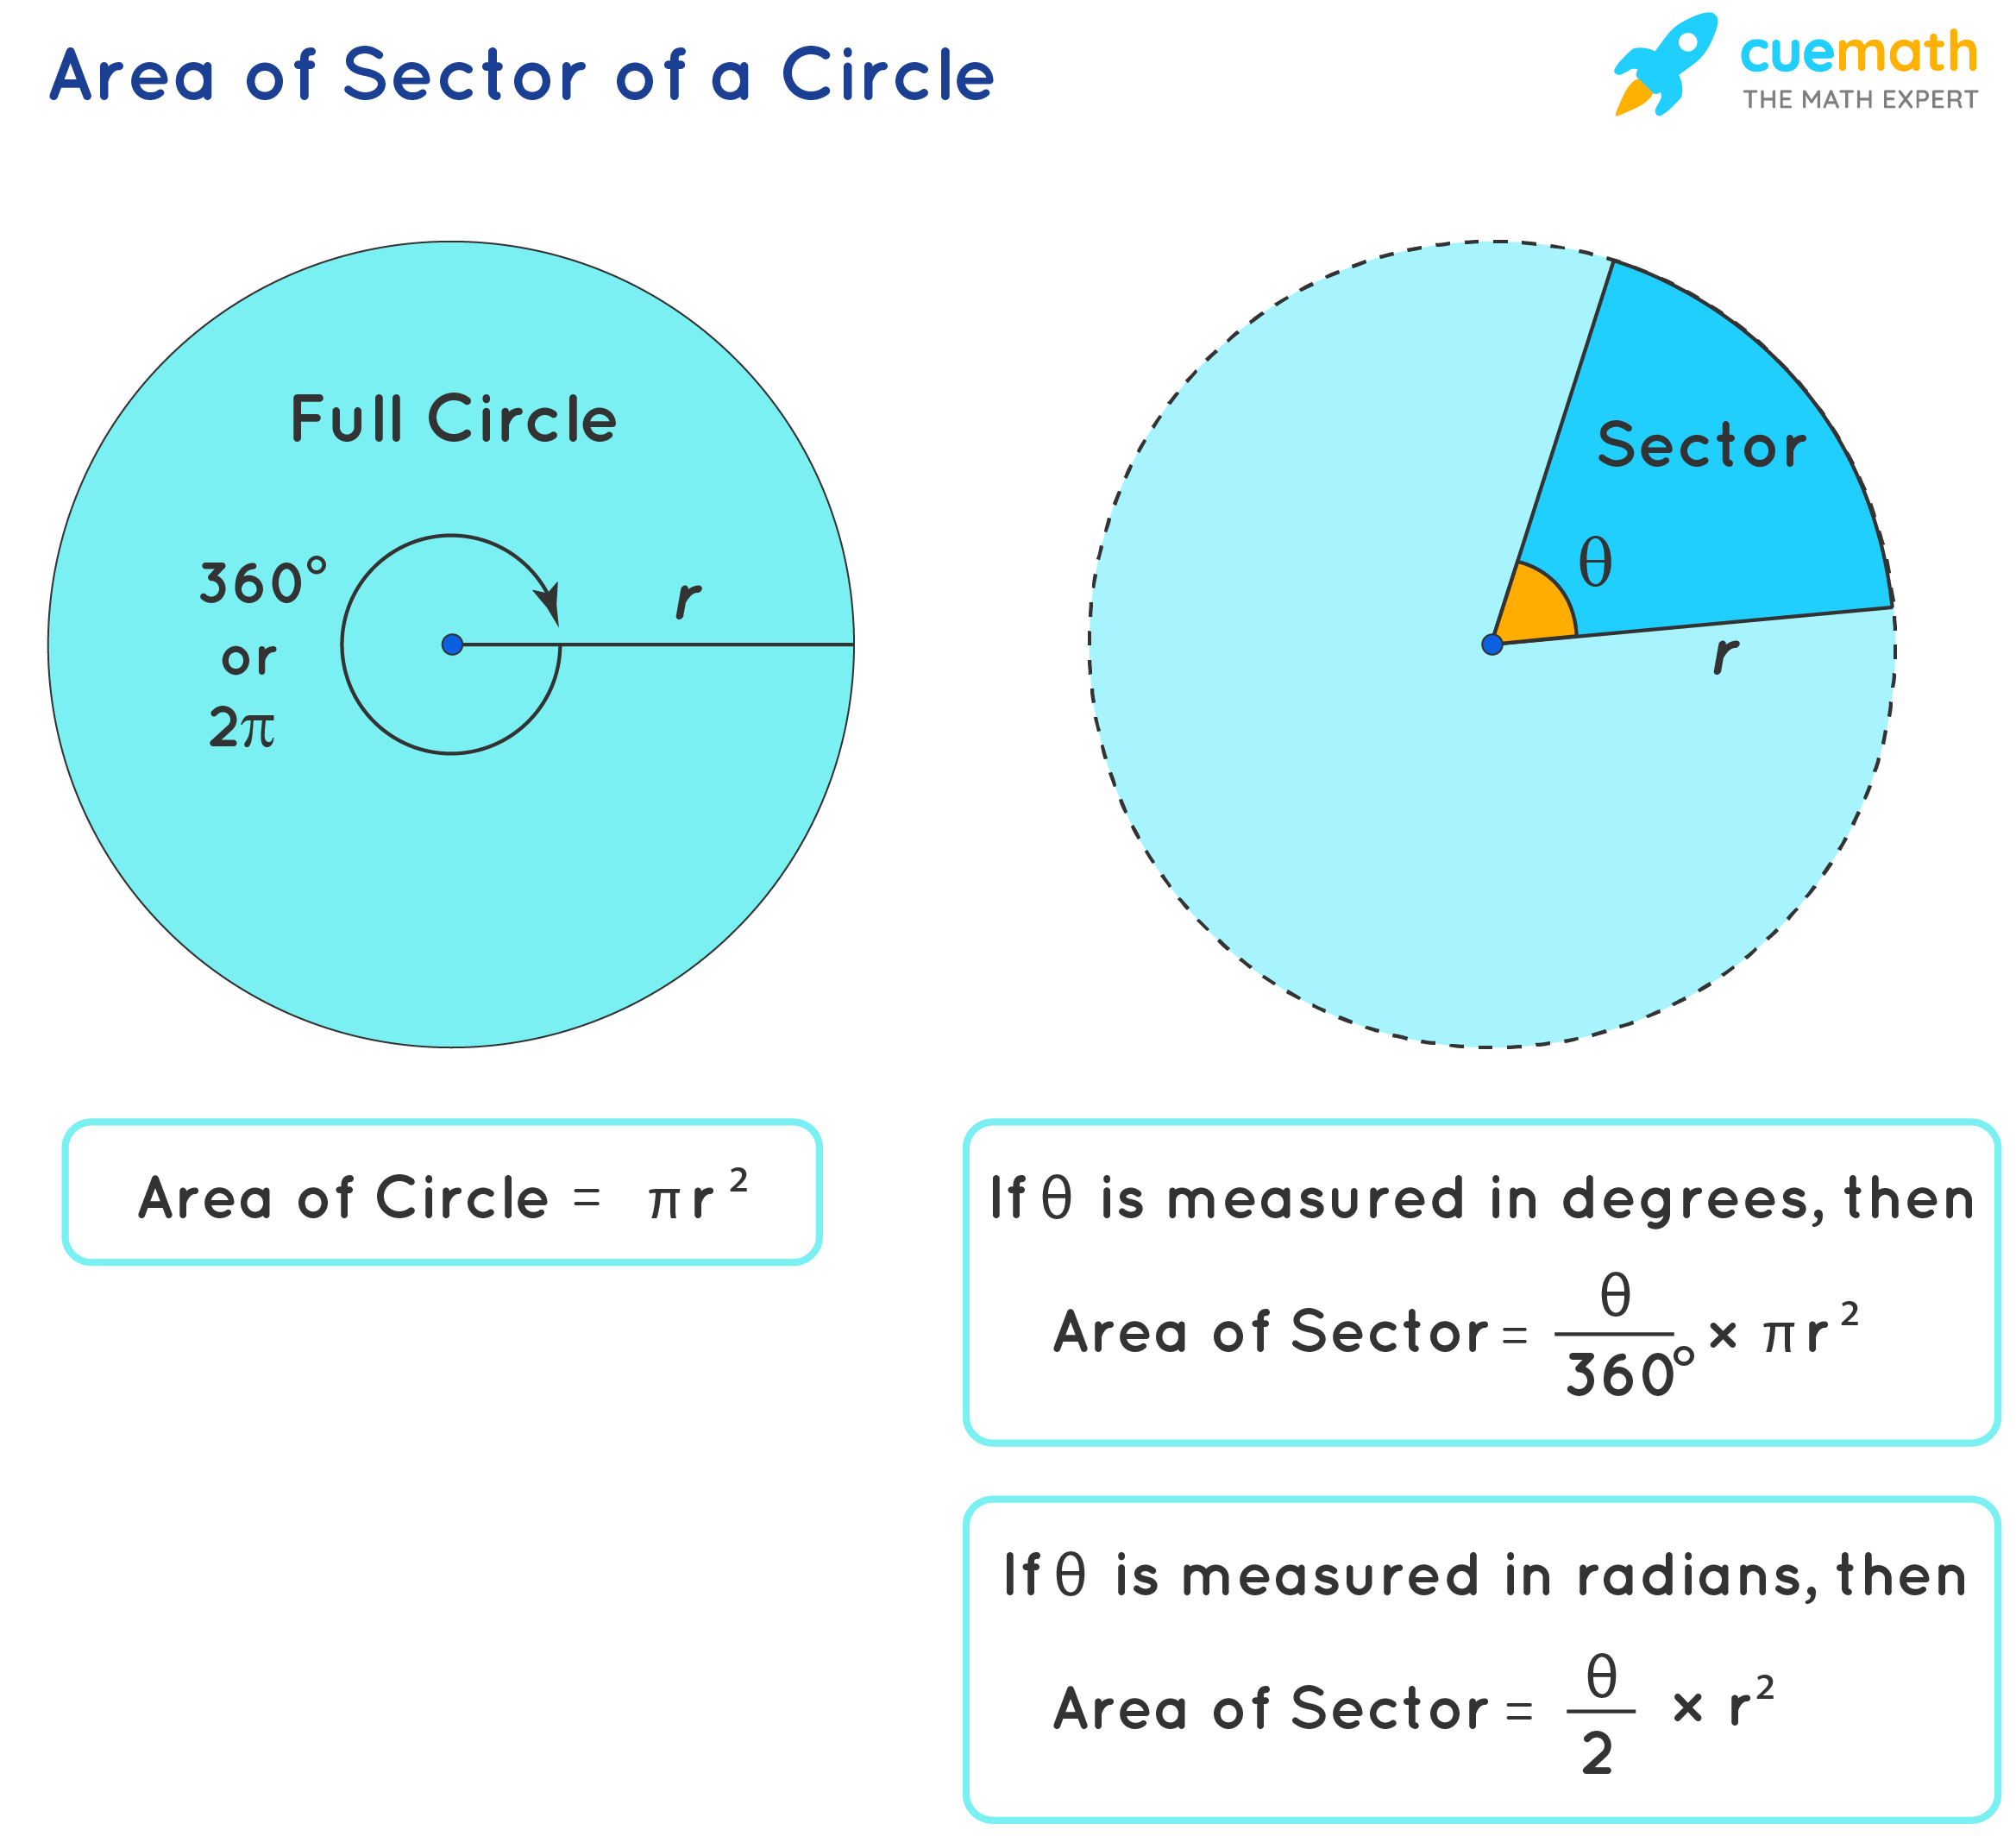 sector-of-a-circle-area-of-sector-of-circle-1620056067.png